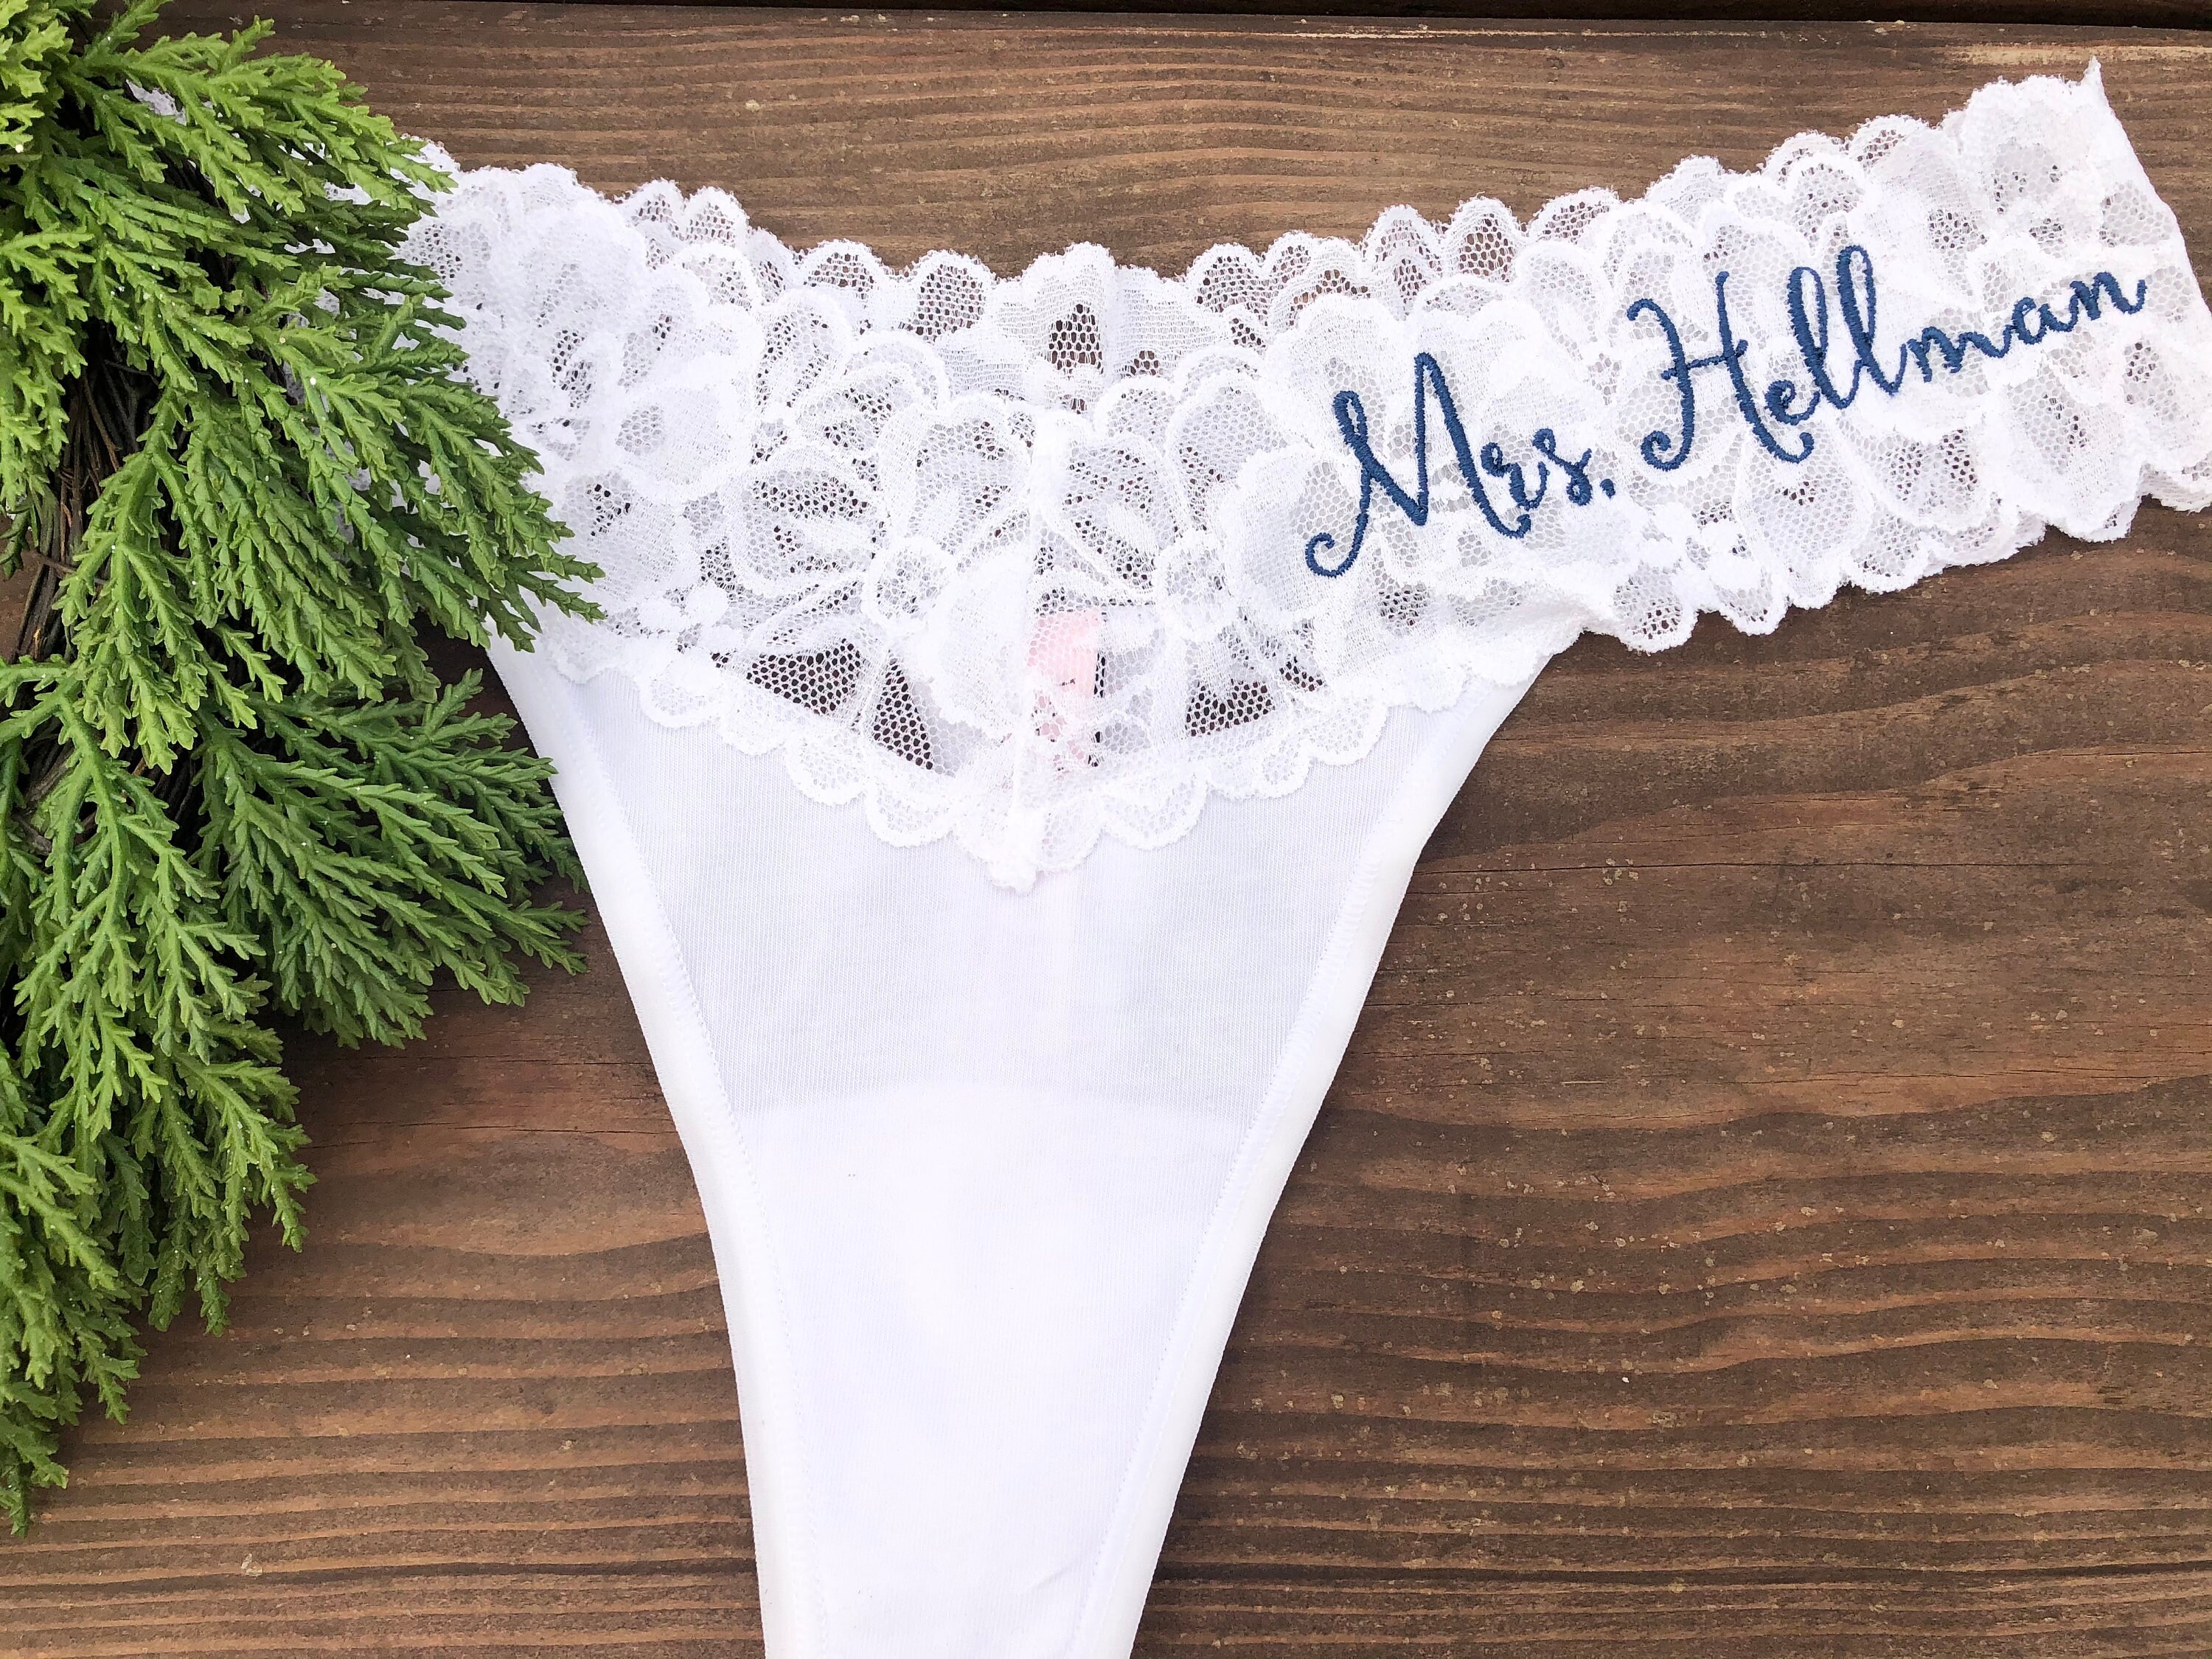 Coconut White/Off White Personalized Mrs. Underwear/Bridal Lingerie/Bride  Panties/Honeymoon Thong /Gift for the Groom! /Bachelorette Party /